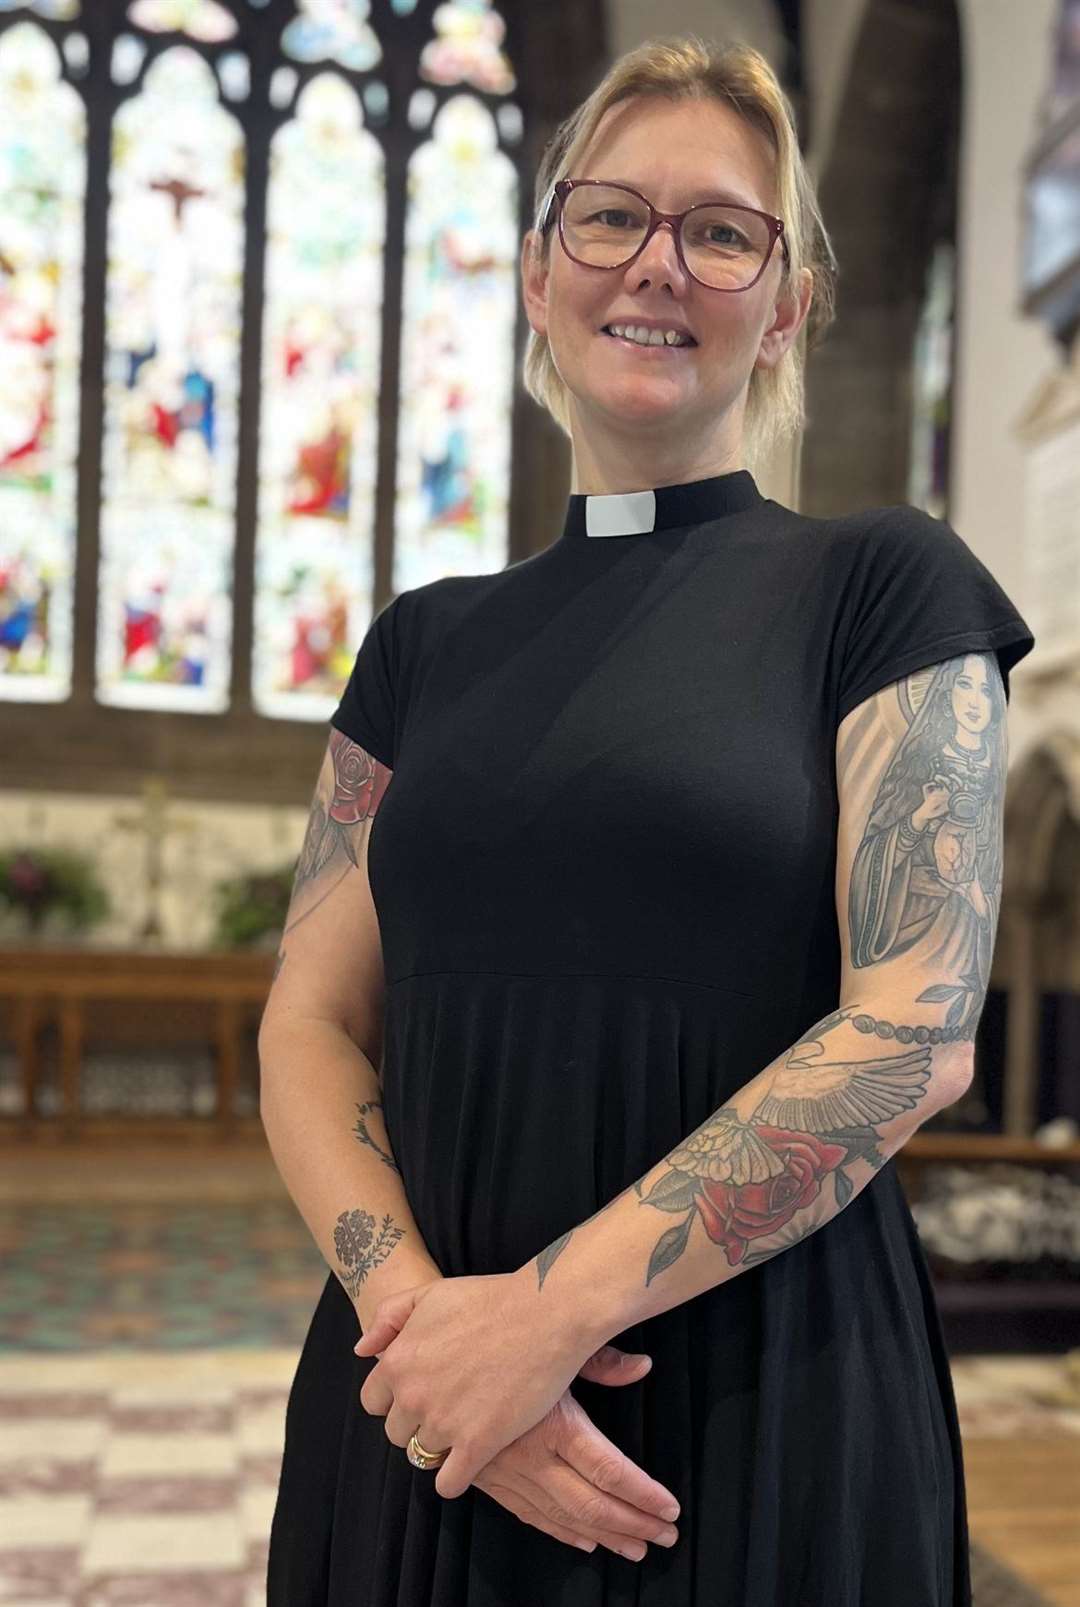 Wendy Dalrymple faced online trolling over her religious tattoos. Photo: Loughborough All Saints with Holy Trinity Church